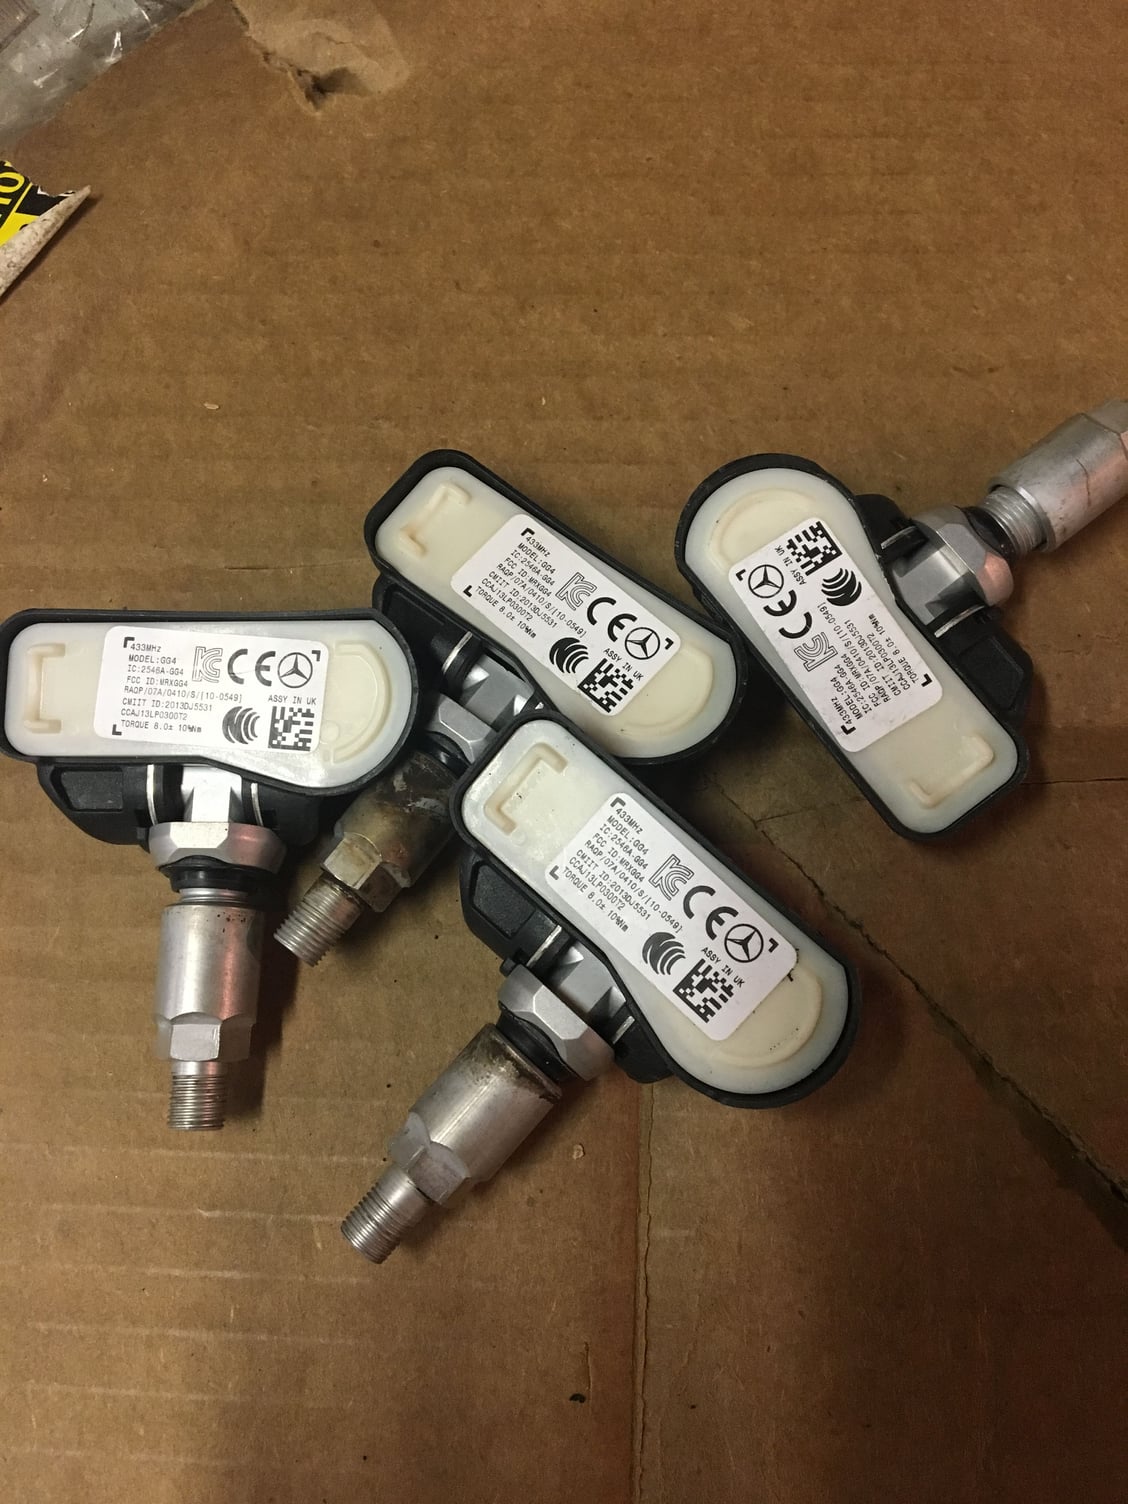 Wheels and Tires/Axles - OEM TPMS Sensors - Mercedes C, GL, GLA, M, ML, S Class (2 sets) - Used - 2012 to 2017 Mercedes-Benz C63 AMG - MINNEAPOLIS, MN 55447, United States